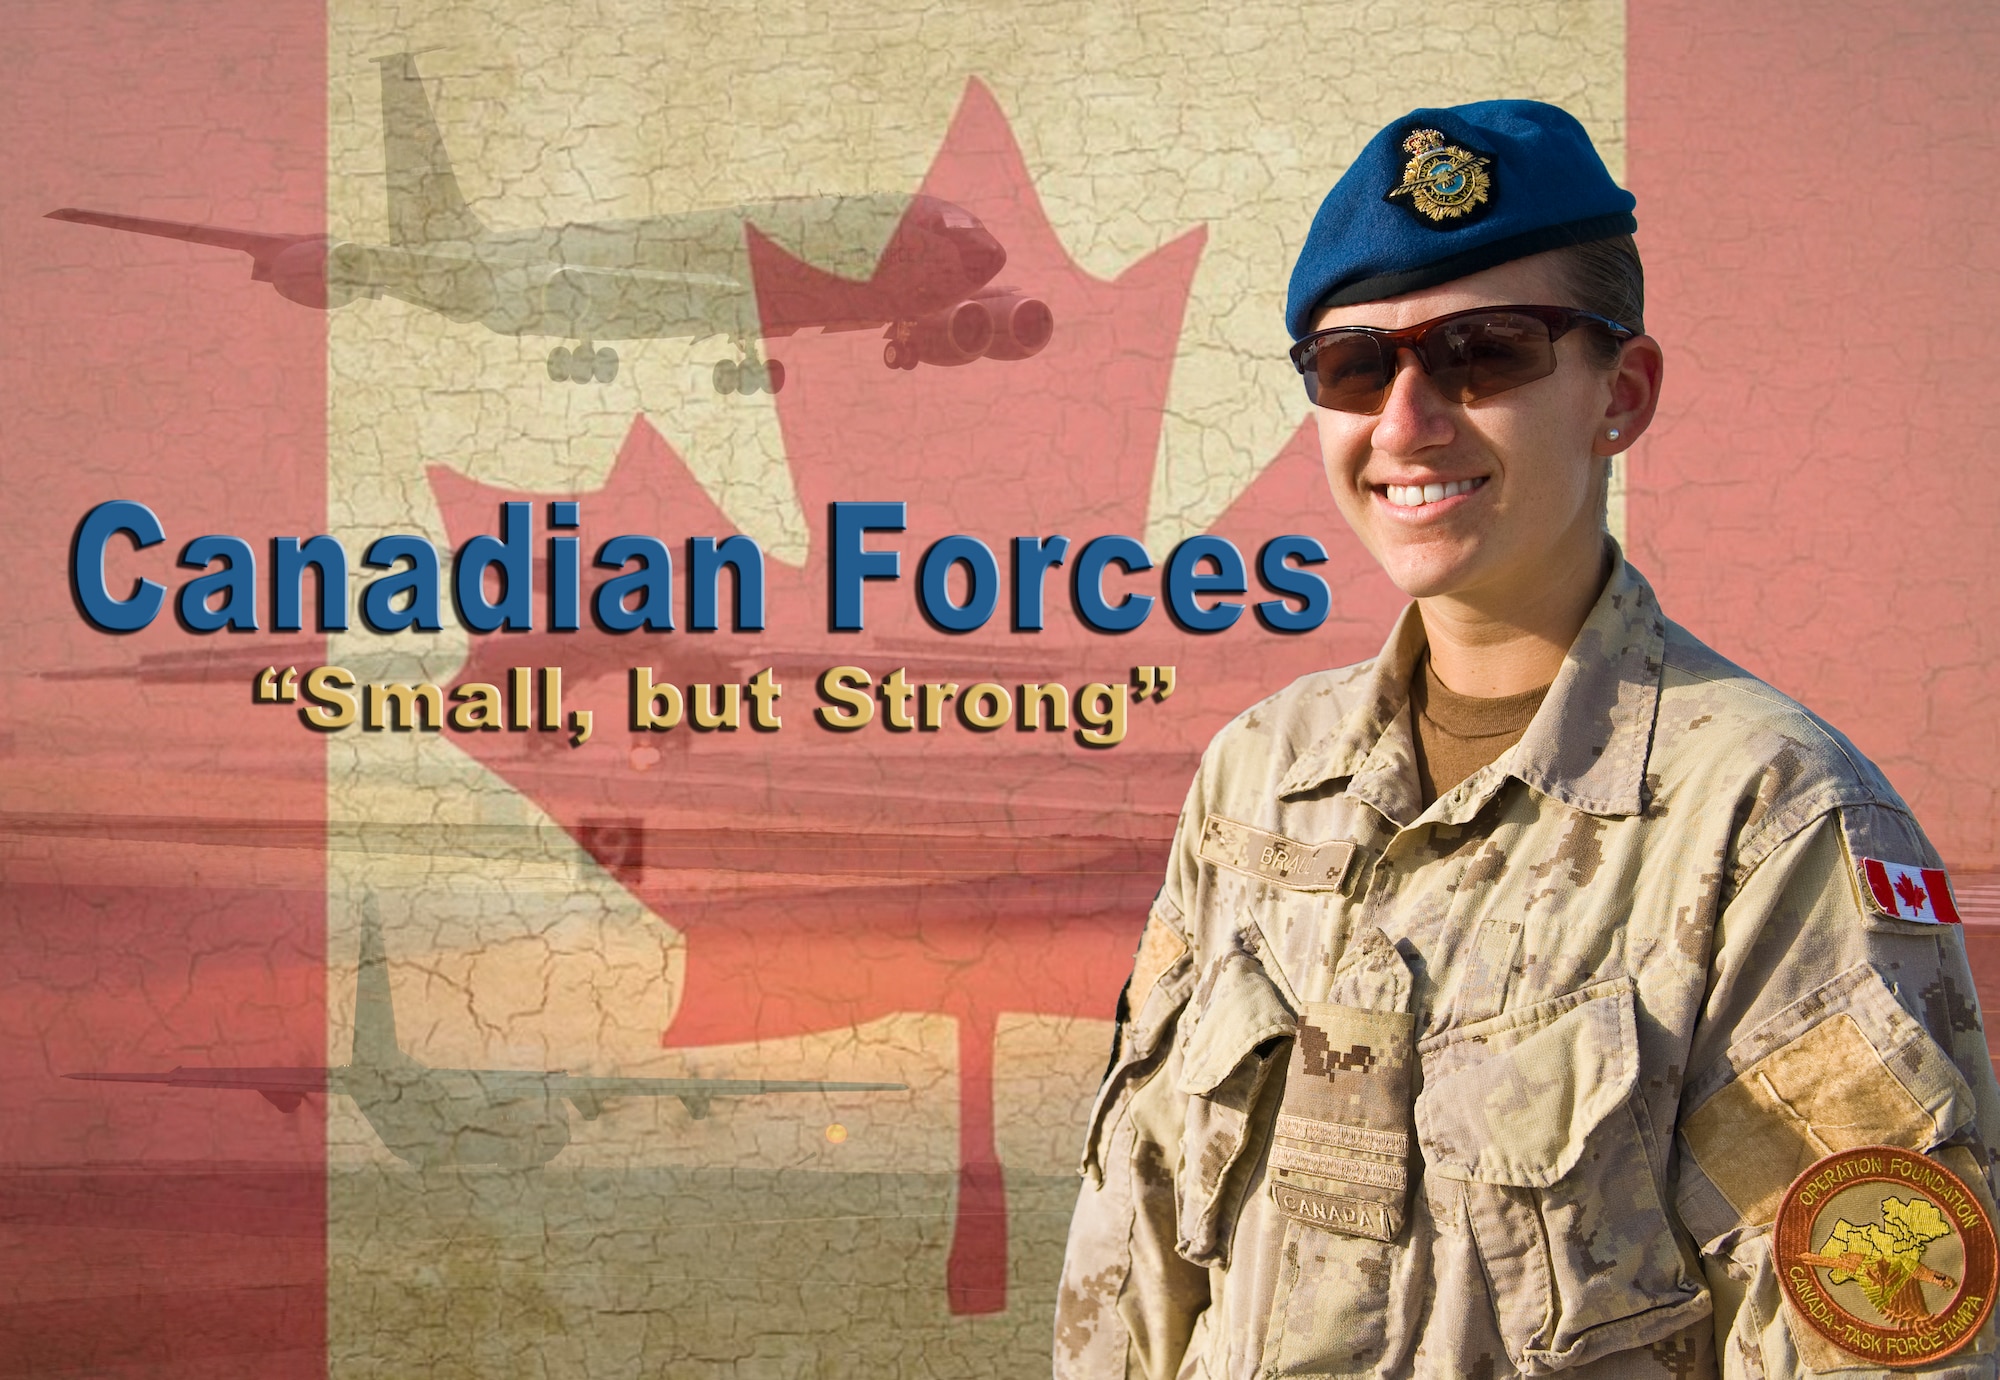 Royal Canadian Air Force Capt. Alexandre Brault poses for a photo at the 379th Air Expeditionary Wing in Southwest Asia, July 8, 2013. Brault is the RCAF 71st Expeditionary Air Control Squadron weapons director deployed from Bagotville, Quebec, Canada. (U.S. Air Force photo illustration/Senior Airman Benjamin Stratton)